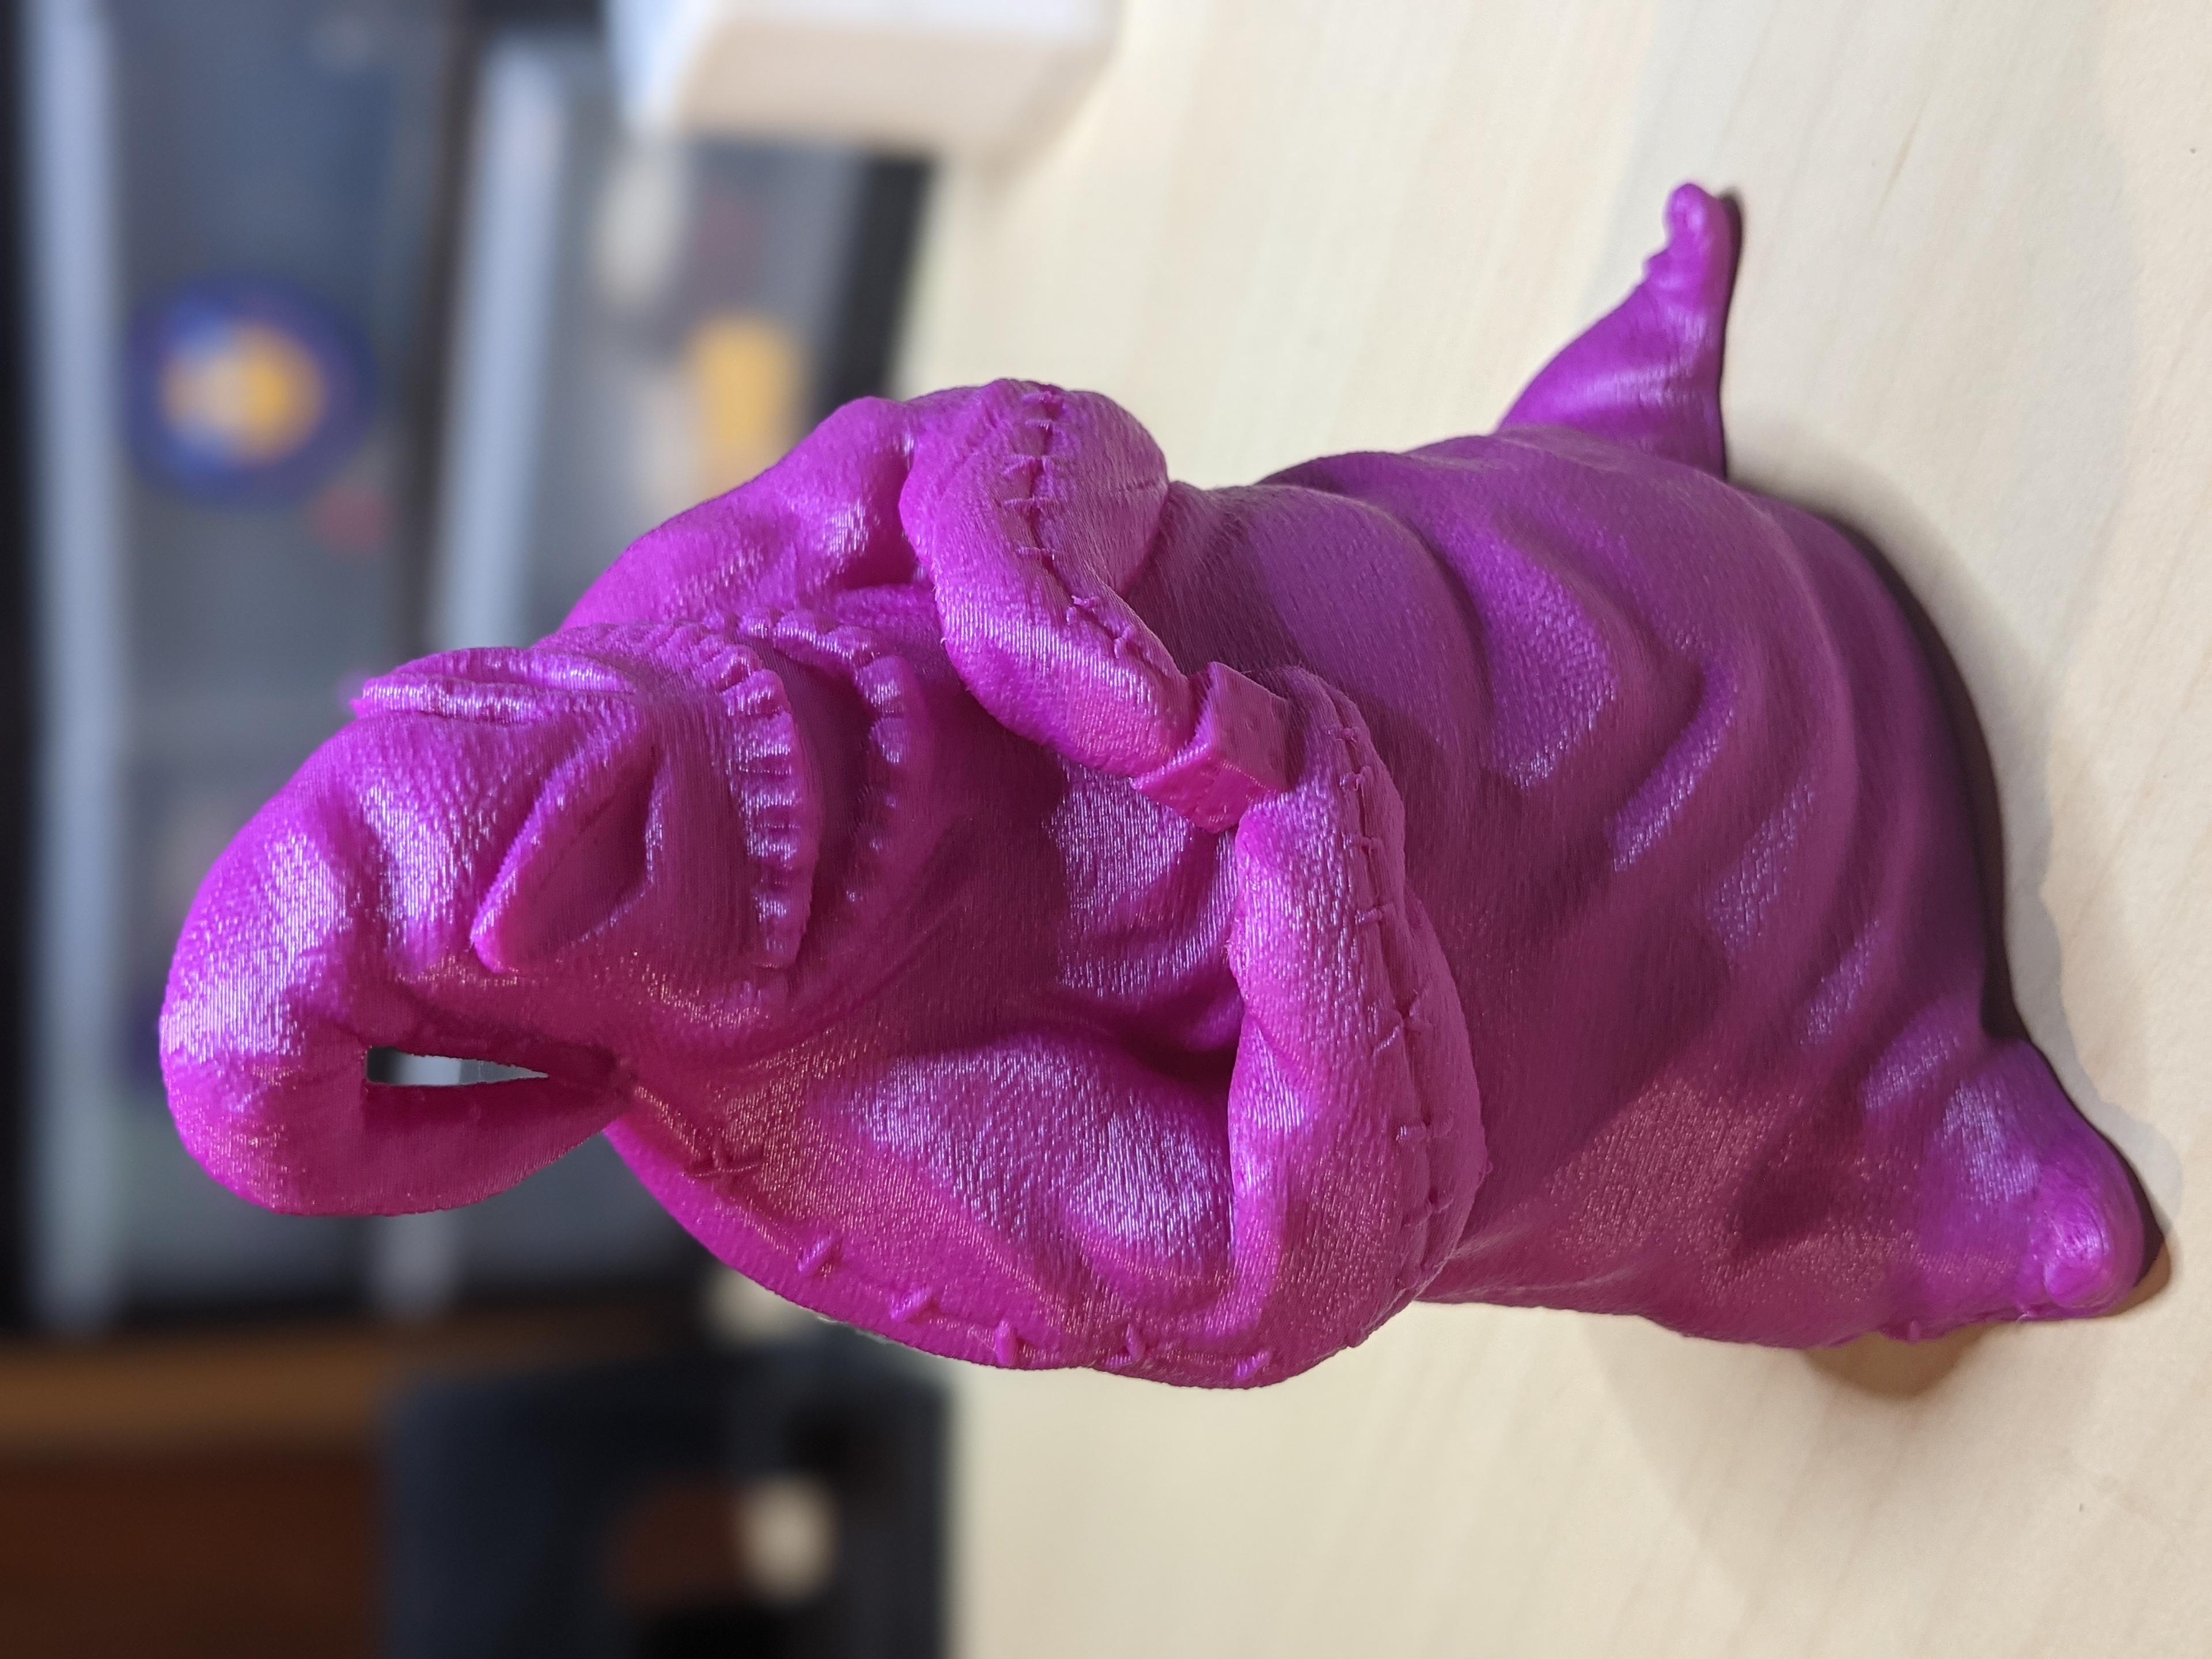 OogieBoogie.stl - I saw this on Joel's stream and HAD to print it, what a gorgeous model, even in FDM! Hats off to the makers! - 3d model